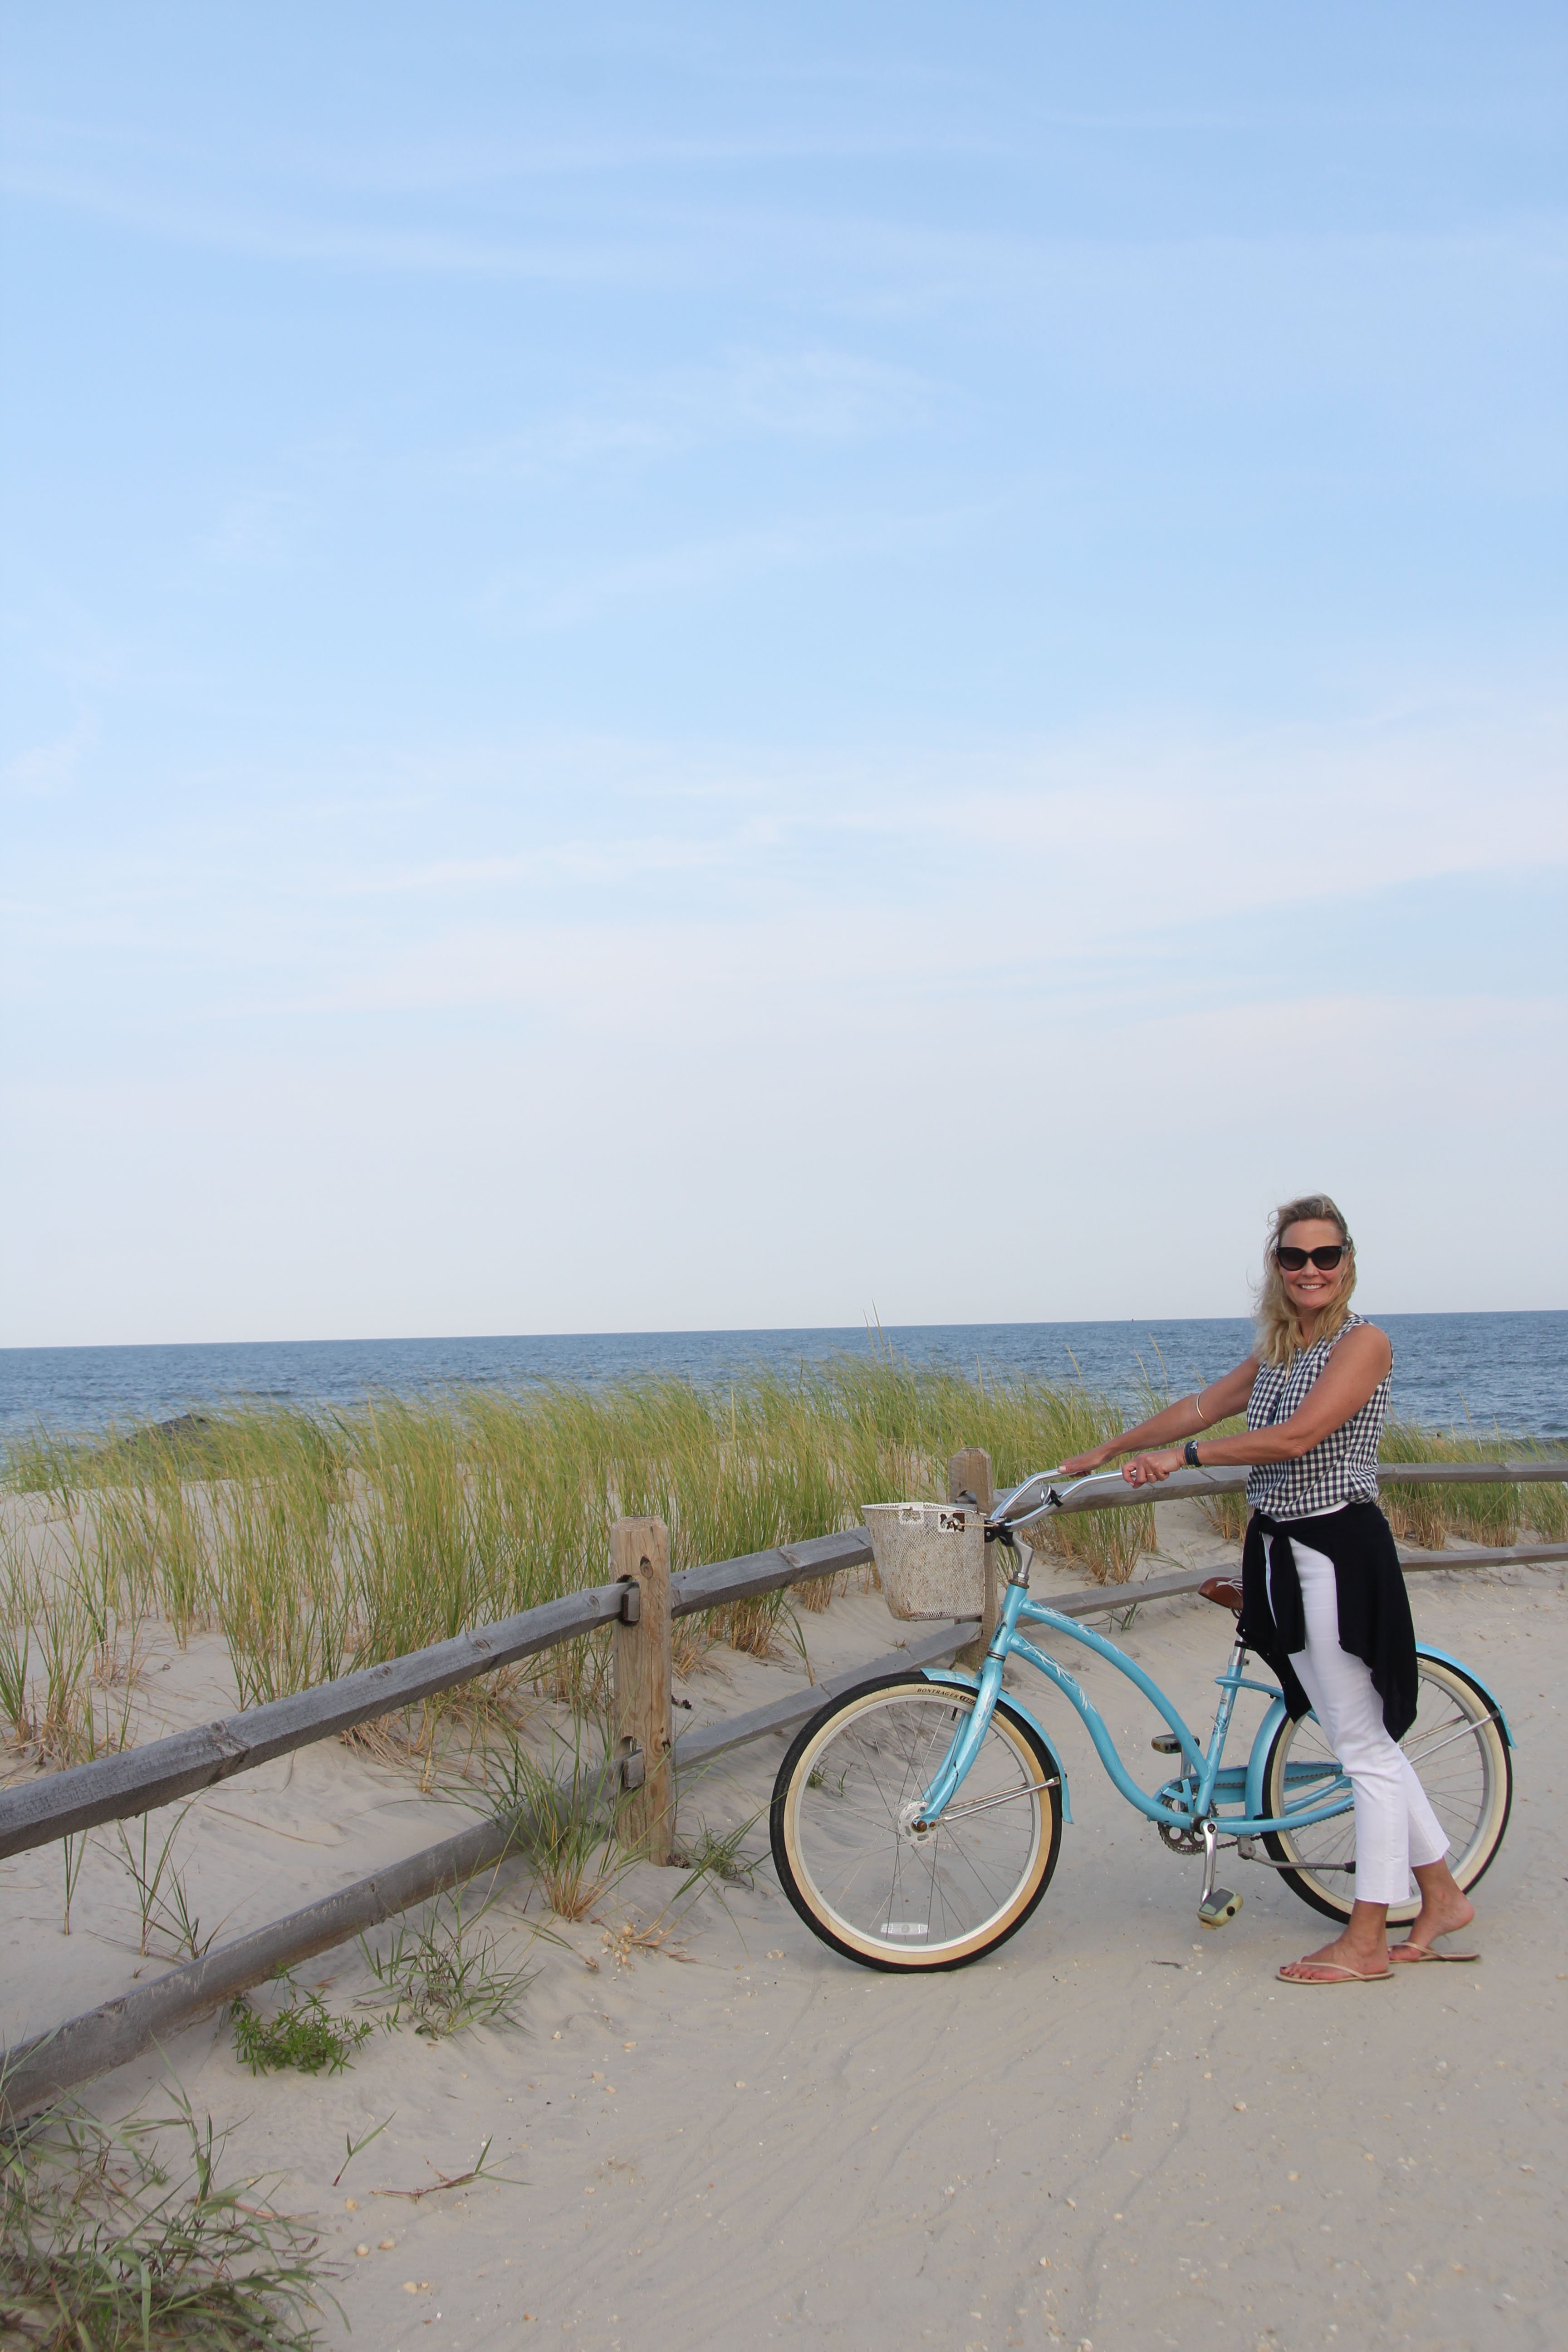 This week Ridgely Brode took her new frayed hem jeans for a spin at the beach and share them on her blog, Ridgely's Radar.